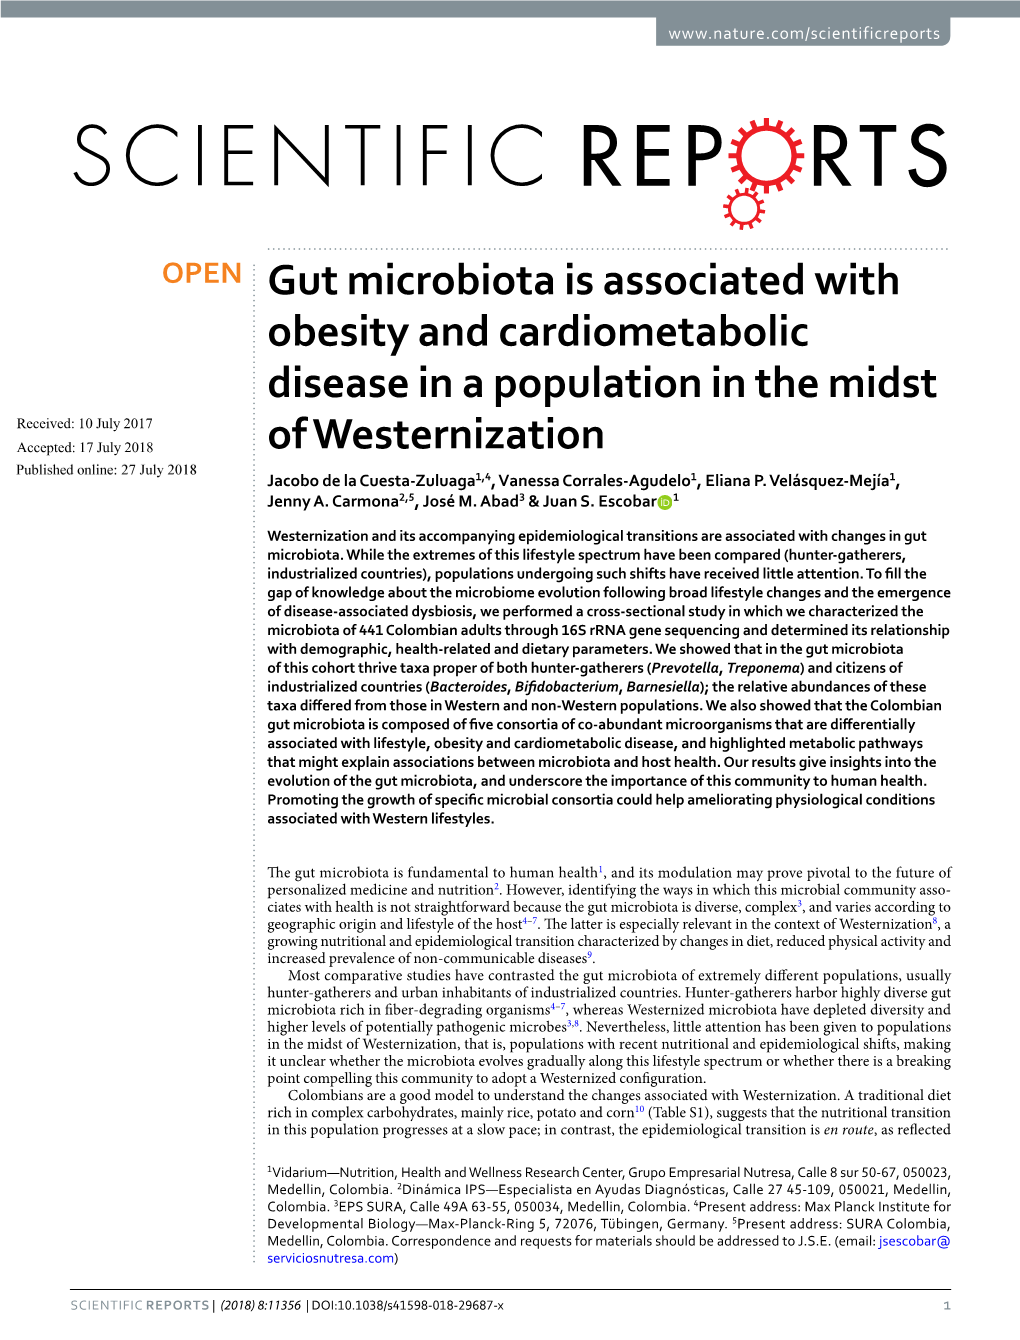 Gut Microbiota Is Associated with Obesity and Cardiometabolic